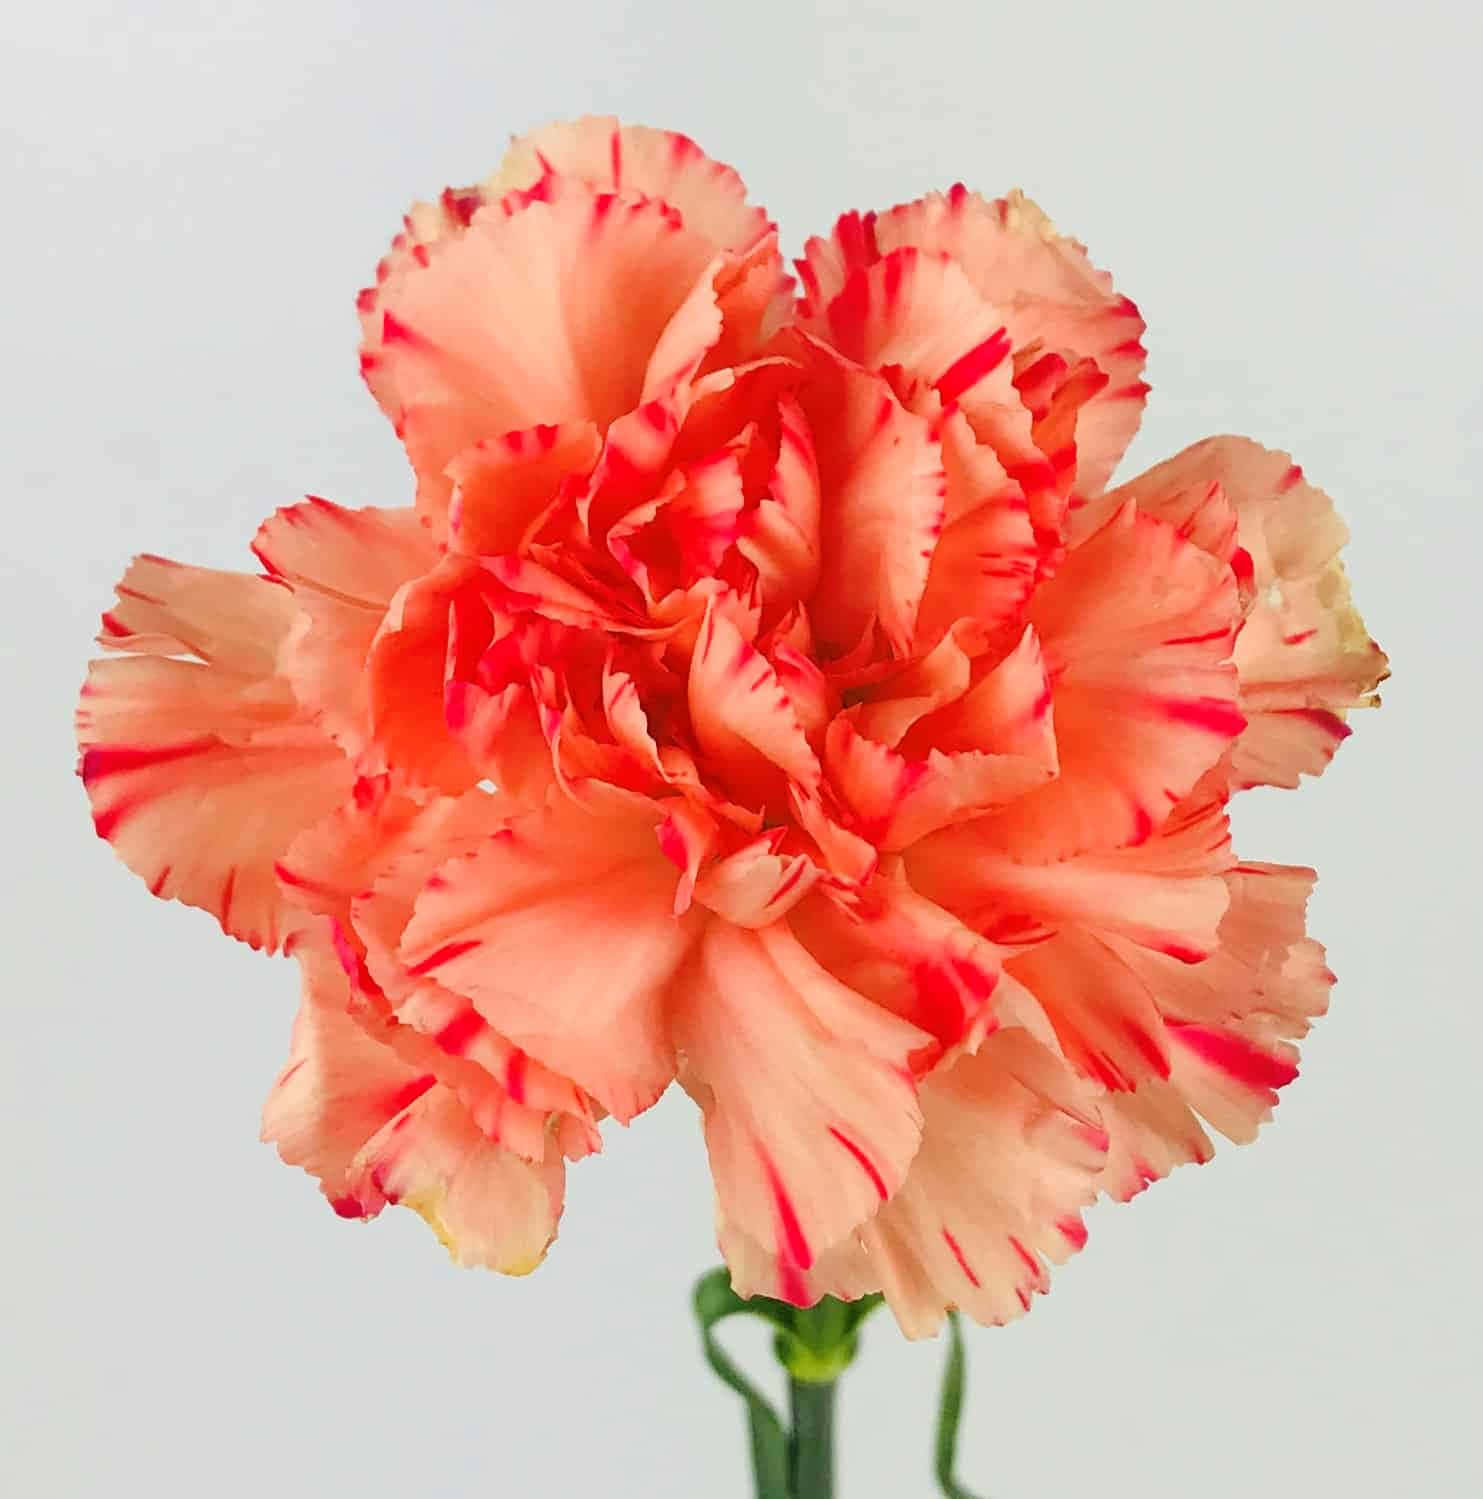 Colorful Bouquet of Carnations